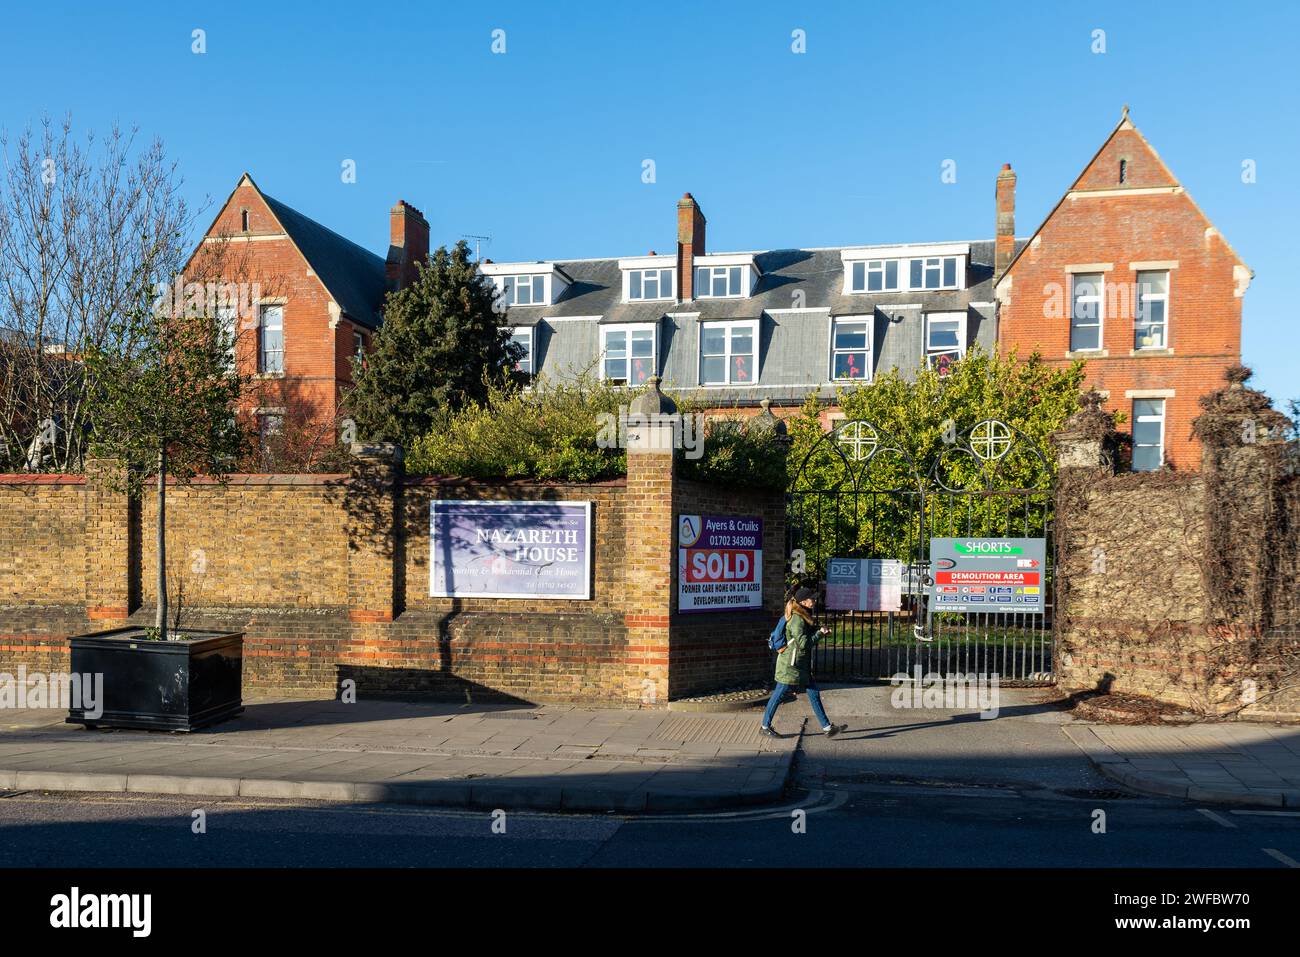 Demolition of Nazareth House in Southend, Essex, former convent nursing & residential home operated by the Sisters of Nazareth. Property development Stock Photo